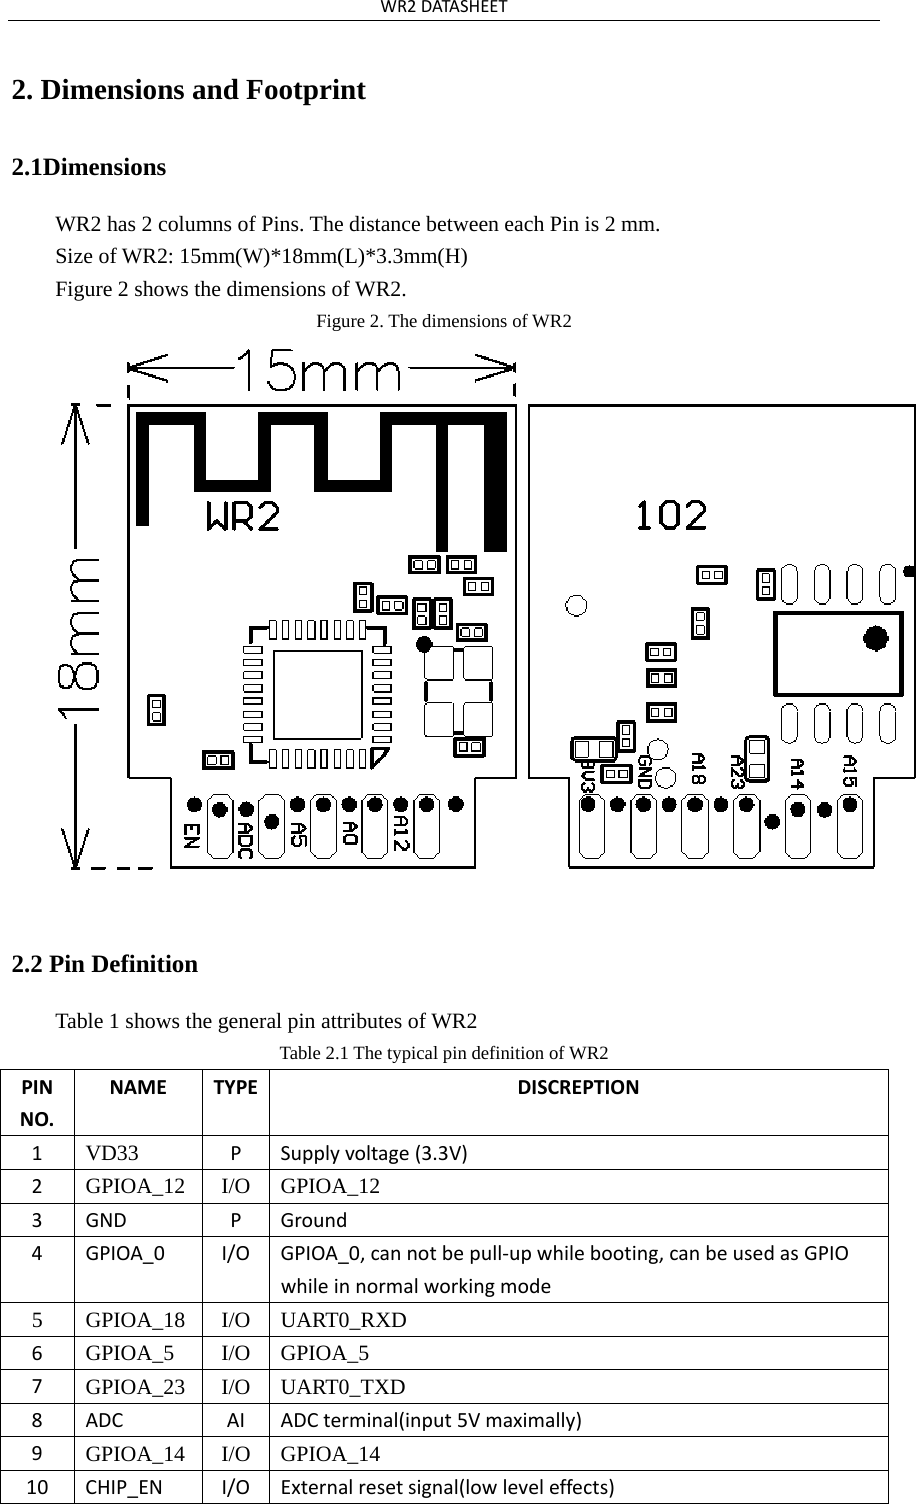 WR2DATASHEET2. Dimensions and Footprint2.1Dimensions WR2 has 2 columns of Pins. The distance between each Pin is 2 mm. Size of WR2: 15mm(W)*18mm(L)*3.3mm(H) Figure 2 shows the dimensions of WR2. Figure 2. The dimensions of WR2 2.2 Pin Definition Table 1 shows the general pin attributes of WR2 Table 2.1 The typical pin definition of WR2 PINNO.NAMETYPEDISCREPTION1VD33PSupplyvoltage(3.3V)2GPIOA_12 I/O GPIOA_12 3GNDPGround4GPIOA_0I/OGPIOA_0,cannotbepull‐upwhilebooting,canbeusedasGPIOwhileinnormalworkingmode5 GPIOA_18 I/O UART0_RXD6GPIOA_5 I/O GPIOA_5 7GPIOA_23 I/O UART0_TXD 8ADCAIADCterminal(input5Vmaximally)9GPIOA_14 I/O GPIOA_14 10CHIP_ENI/OExternalresetsignal(lowleveleffects)